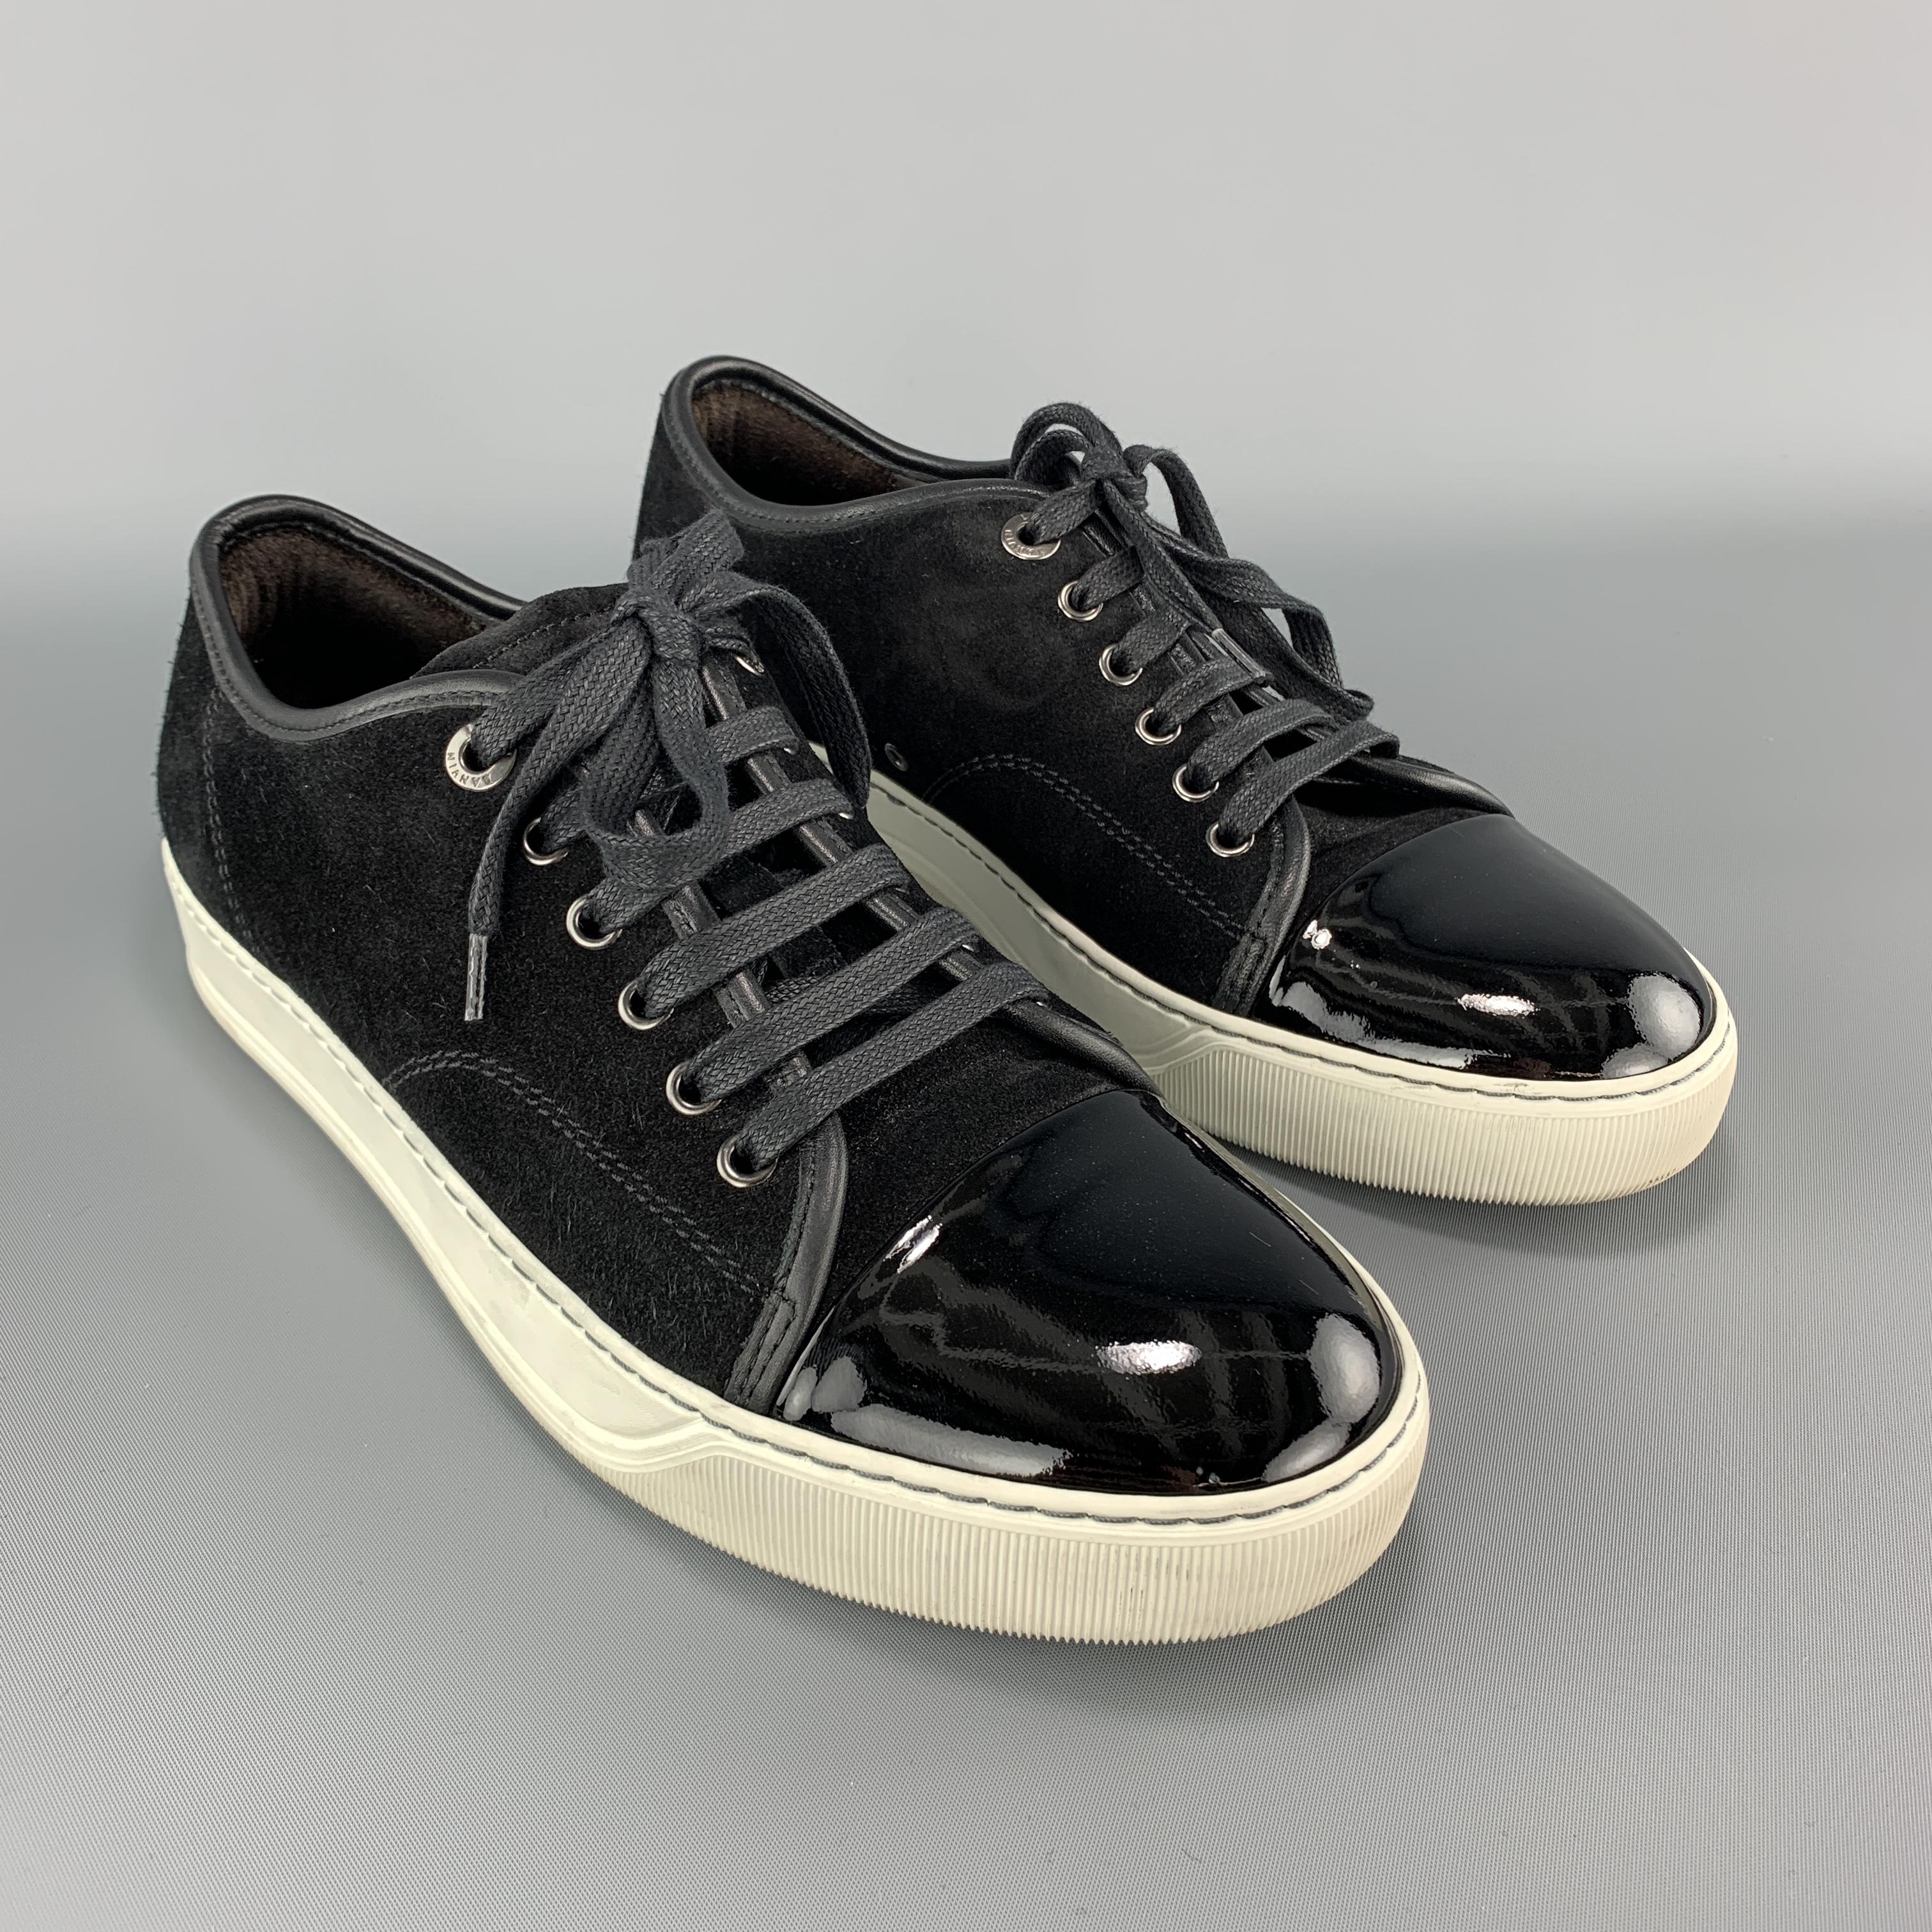 LANVIN sneakers come in black suede with a patent leather toe cap and white rubber sole. Made in Portugal.

Very Good Pre-Owned Condition.
Marked: UK 5

Outsole: 11 x 4 in.